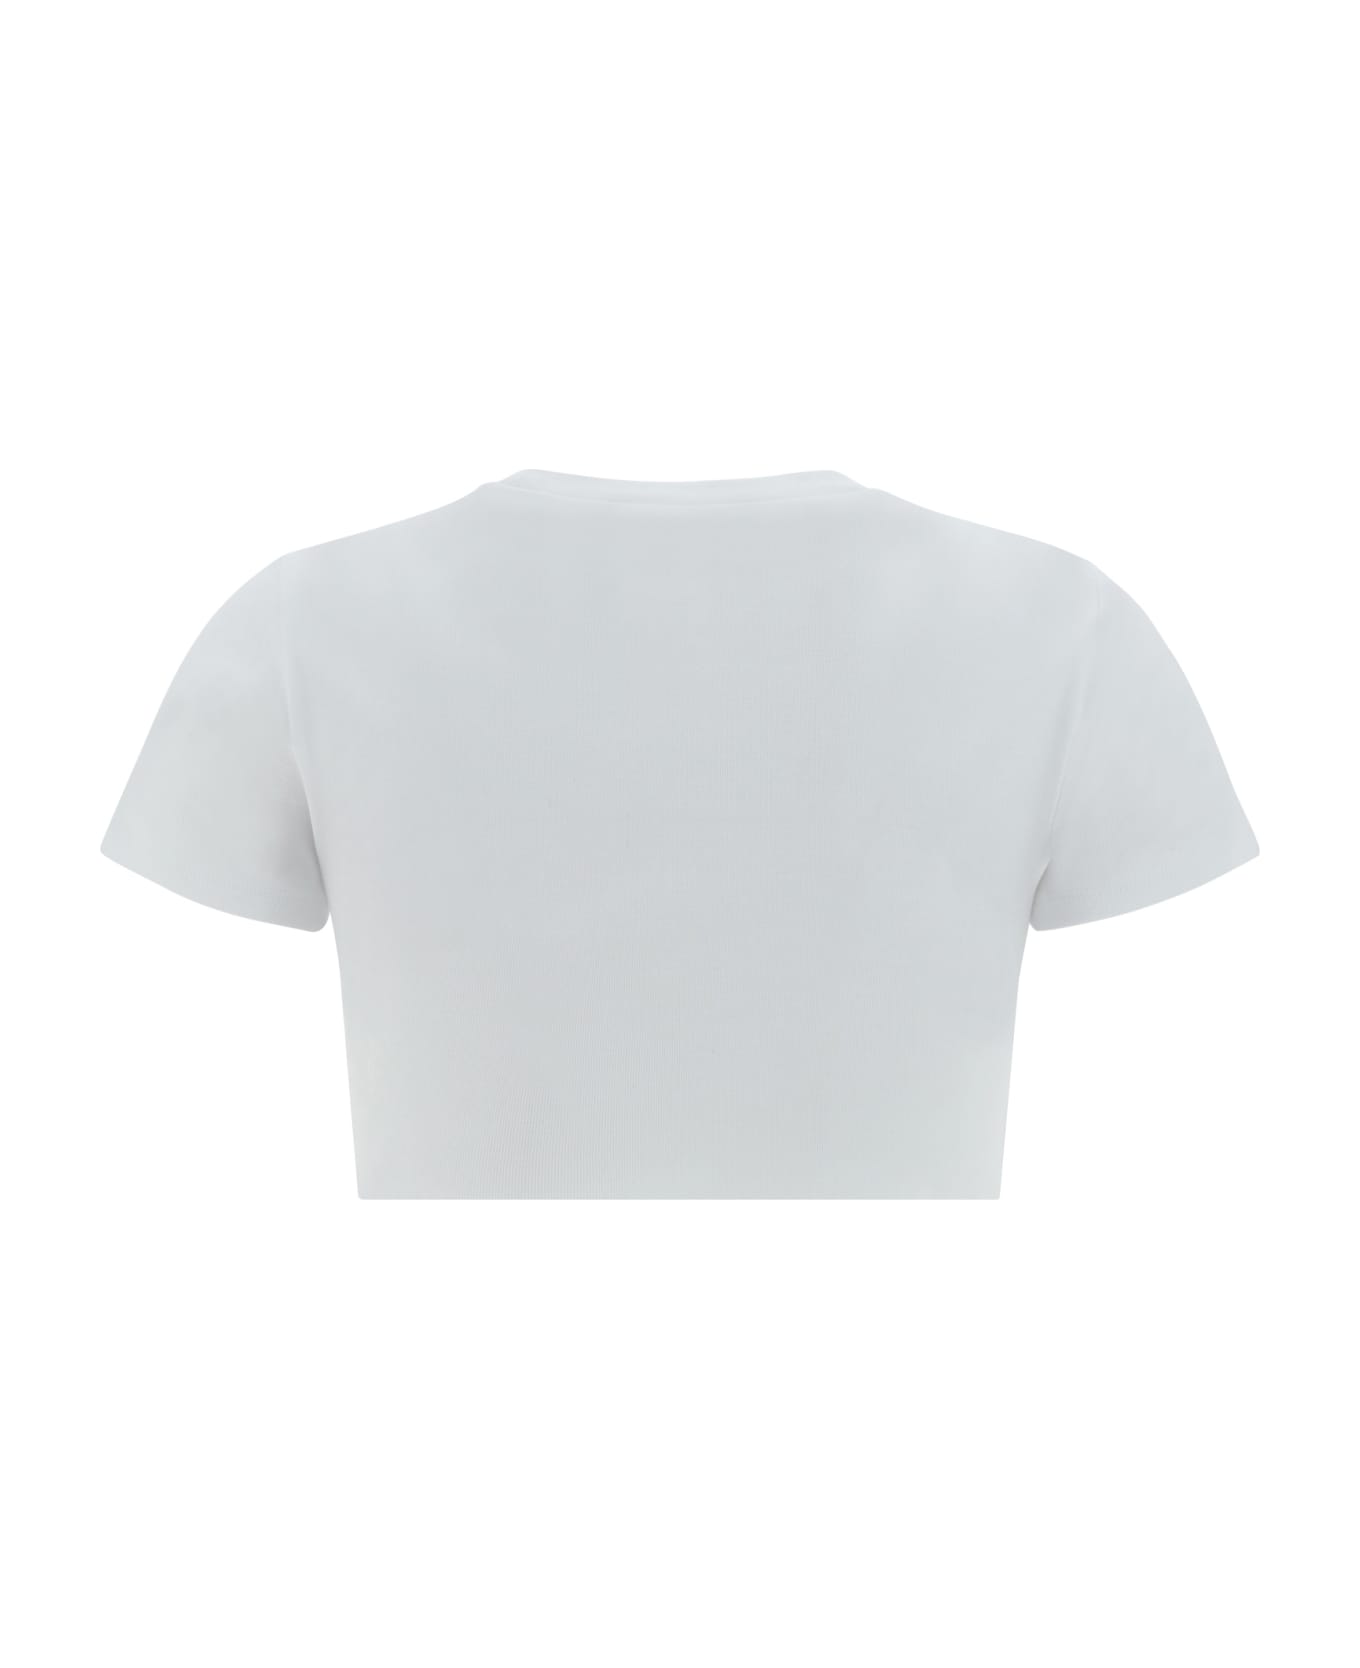 Dsquared2 Cropped T-shirt - 100